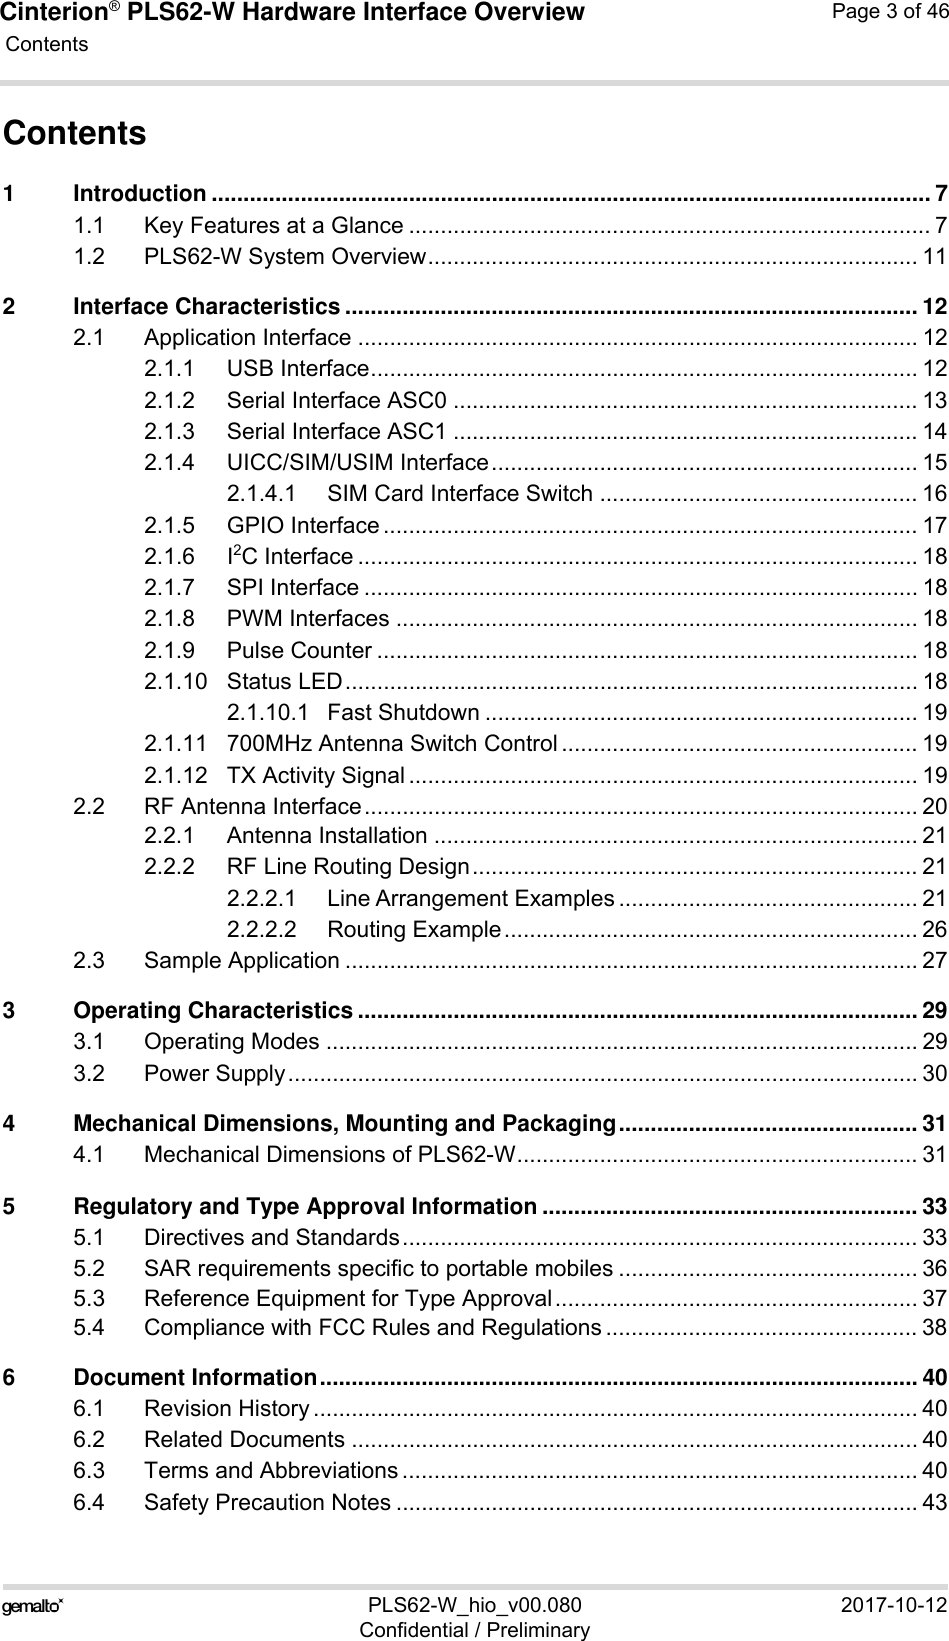 Cinterion® PLS62-W Hardware Interface Overview Contents46PLS62-W_hio_v00.080 2017-10-12Confidential / PreliminaryPage 3 of 46Contents1 Introduction ................................................................................................................. 71.1 Key Features at a Glance .................................................................................. 71.2 PLS62-W System Overview............................................................................. 112 Interface Characteristics .......................................................................................... 122.1 Application Interface ........................................................................................ 122.1.1 USB Interface...................................................................................... 122.1.2 Serial Interface ASC0 ......................................................................... 132.1.3 Serial Interface ASC1 ......................................................................... 142.1.4 UICC/SIM/USIM Interface................................................................... 152.1.4.1 SIM Card Interface Switch .................................................. 162.1.5 GPIO Interface .................................................................................... 172.1.6 I2C Interface ........................................................................................ 182.1.7 SPI Interface ....................................................................................... 182.1.8 PWM Interfaces .................................................................................. 182.1.9 Pulse Counter ..................................................................................... 182.1.10 Status LED.......................................................................................... 182.1.10.1 Fast Shutdown .................................................................... 192.1.11 700MHz Antenna Switch Control ........................................................ 192.1.12 TX Activity Signal ................................................................................ 192.2 RF Antenna Interface....................................................................................... 202.2.1 Antenna Installation ............................................................................ 212.2.2 RF Line Routing Design...................................................................... 212.2.2.1 Line Arrangement Examples ............................................... 212.2.2.2 Routing Example................................................................. 262.3 Sample Application .......................................................................................... 273 Operating Characteristics ........................................................................................ 293.1 Operating Modes ............................................................................................. 293.2 Power Supply................................................................................................... 304 Mechanical Dimensions, Mounting and Packaging............................................... 314.1 Mechanical Dimensions of PLS62-W............................................................... 315 Regulatory and Type Approval Information ........................................................... 335.1 Directives and Standards................................................................................. 335.2 SAR requirements specific to portable mobiles ............................................... 365.3 Reference Equipment for Type Approval......................................................... 375.4 Compliance with FCC Rules and Regulations ................................................. 386 Document Information.............................................................................................. 406.1 Revision History ............................................................................................... 406.2 Related Documents ......................................................................................... 406.3 Terms and Abbreviations ................................................................................. 406.4 Safety Precaution Notes .................................................................................. 43